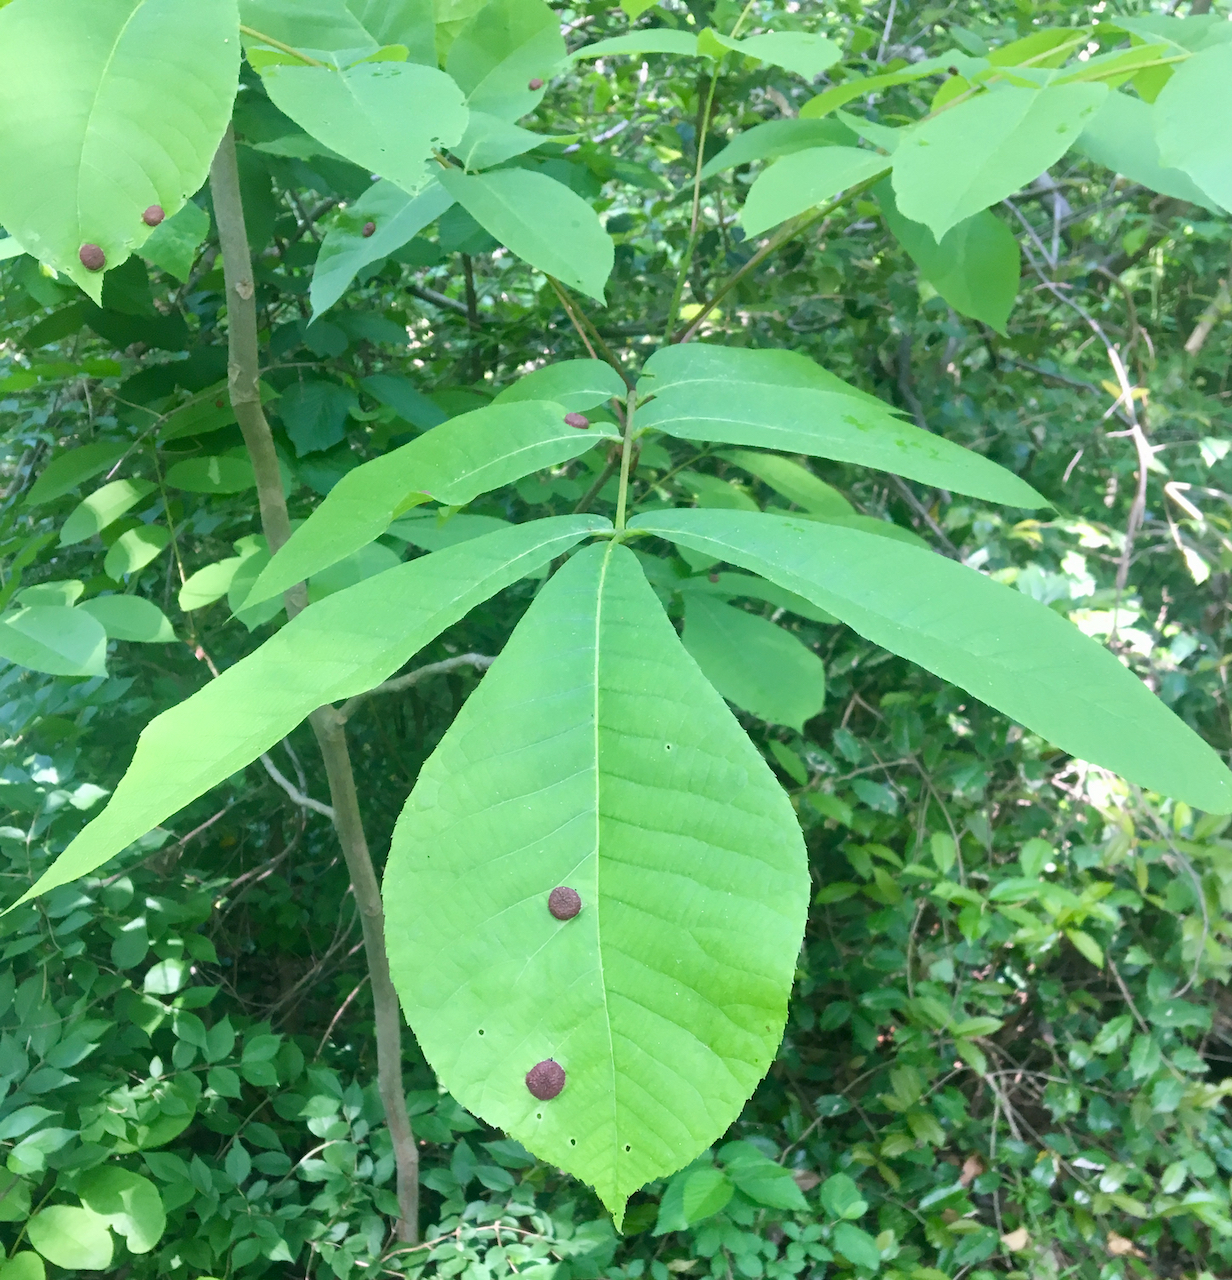 The Scientific Name is Carya tomentosa. You will likely hear them called Mockernut Hickory, White Hickory. This picture shows the Spangle Gall (caused by an Hemipteran in the genus Phylloxera) on Mockernut leaves  of Carya tomentosa